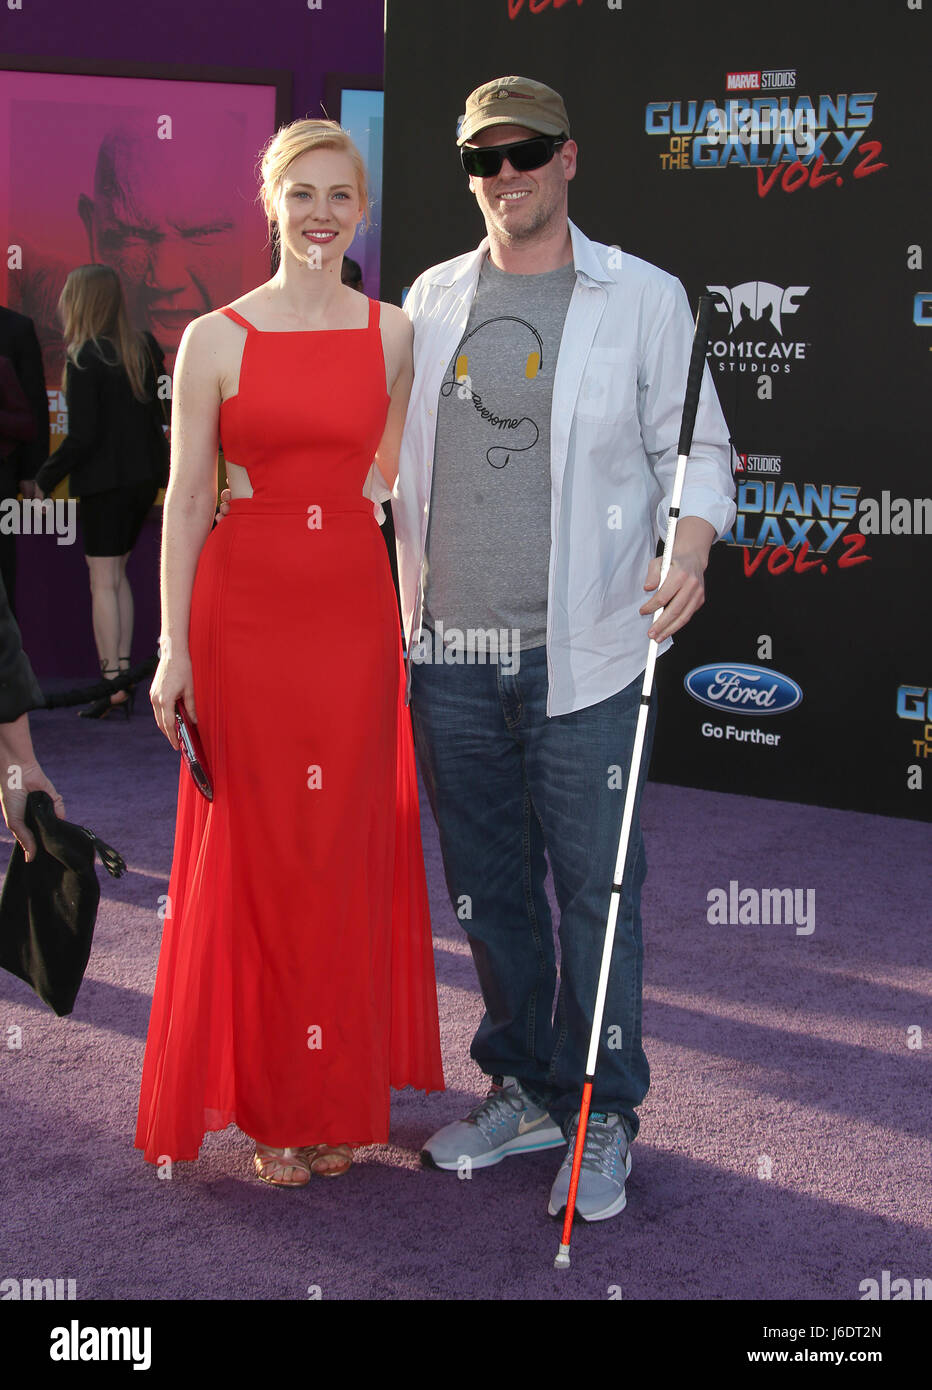 The world premiere of Marvel Studios’ 'Guardians of the Galaxy Vol. 2.' - Arrivals  Featuring: Deborah Ann Woll, E.J. Scott Where: Hollywood, California, United States When: 19 Apr 2017 Credit: FayesVision/WENN.com Stock Photo